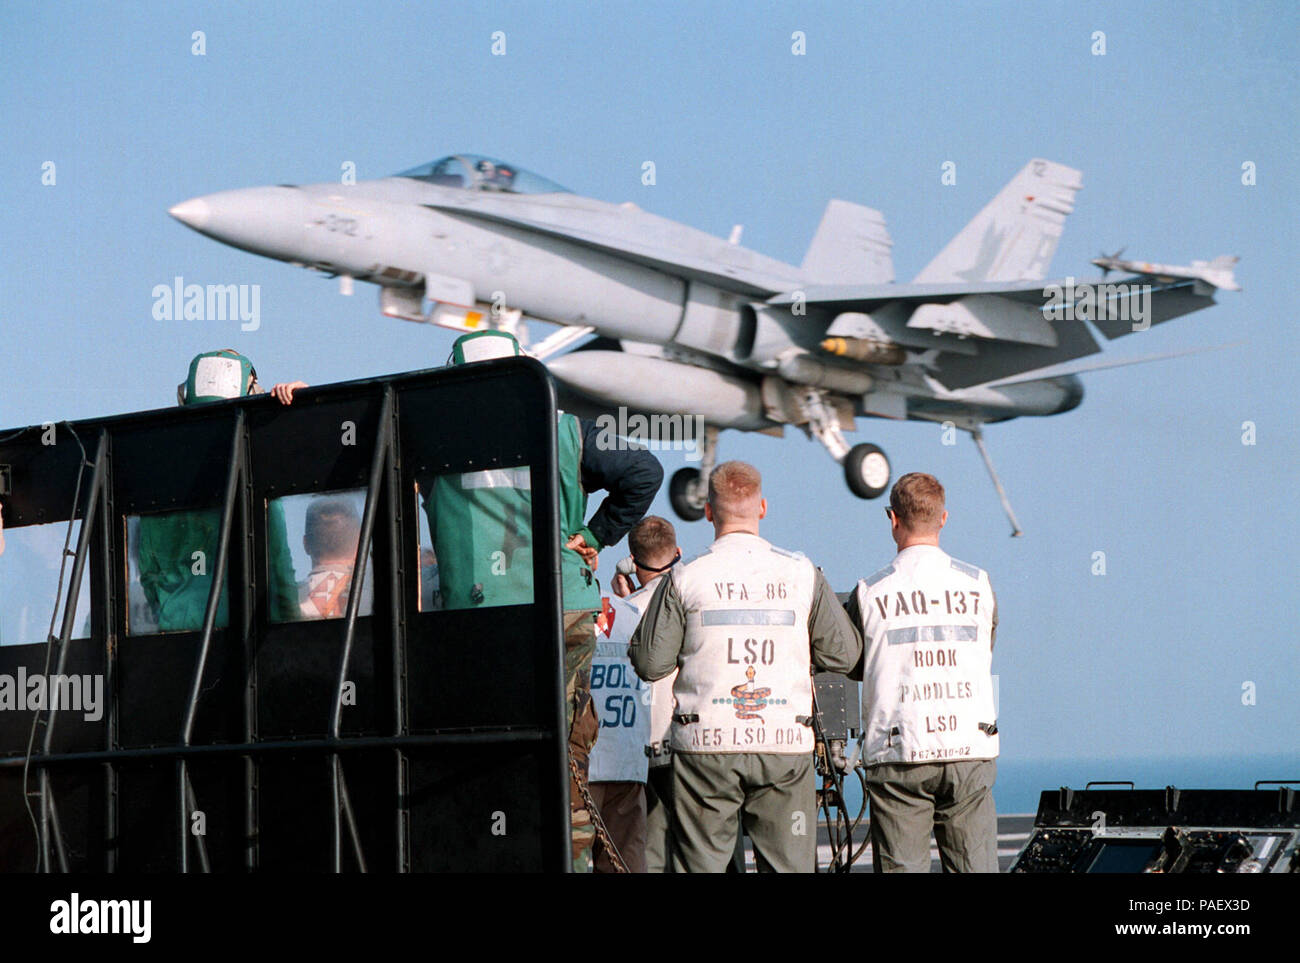 Gulf (December 23rd, 1997) On board the nuclear powered aircraft carrier USS George Washington (CVN 73). . . .A F/A-18C ТHornetУ from Fighter Attack Squadron Eighty Two (VFA-82) is guided to the flight deck by a team of Landing Signals OfficerХs. George Washington and Carrier Air Wing One (CVW 1) are currently conducting operations in the Persian Gulf in support of UN sanctions against Iraq under operation Southern Watch.  U.S. Navy Stock Photo